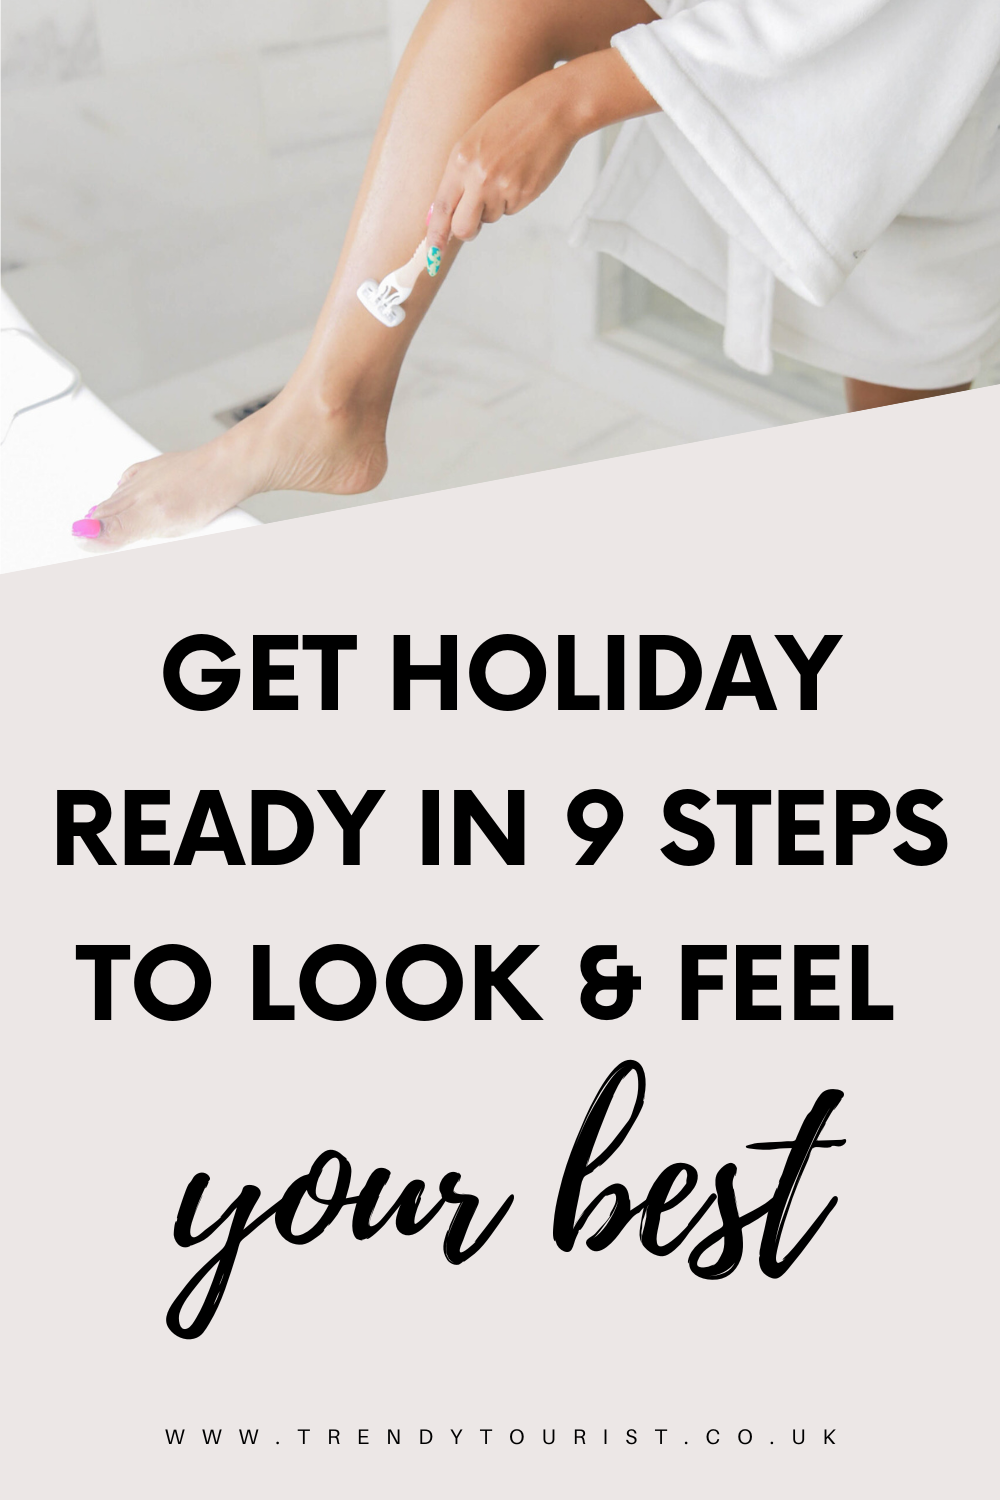 Get Holiday Ready in 9 Steps to Look & Feel Your Best